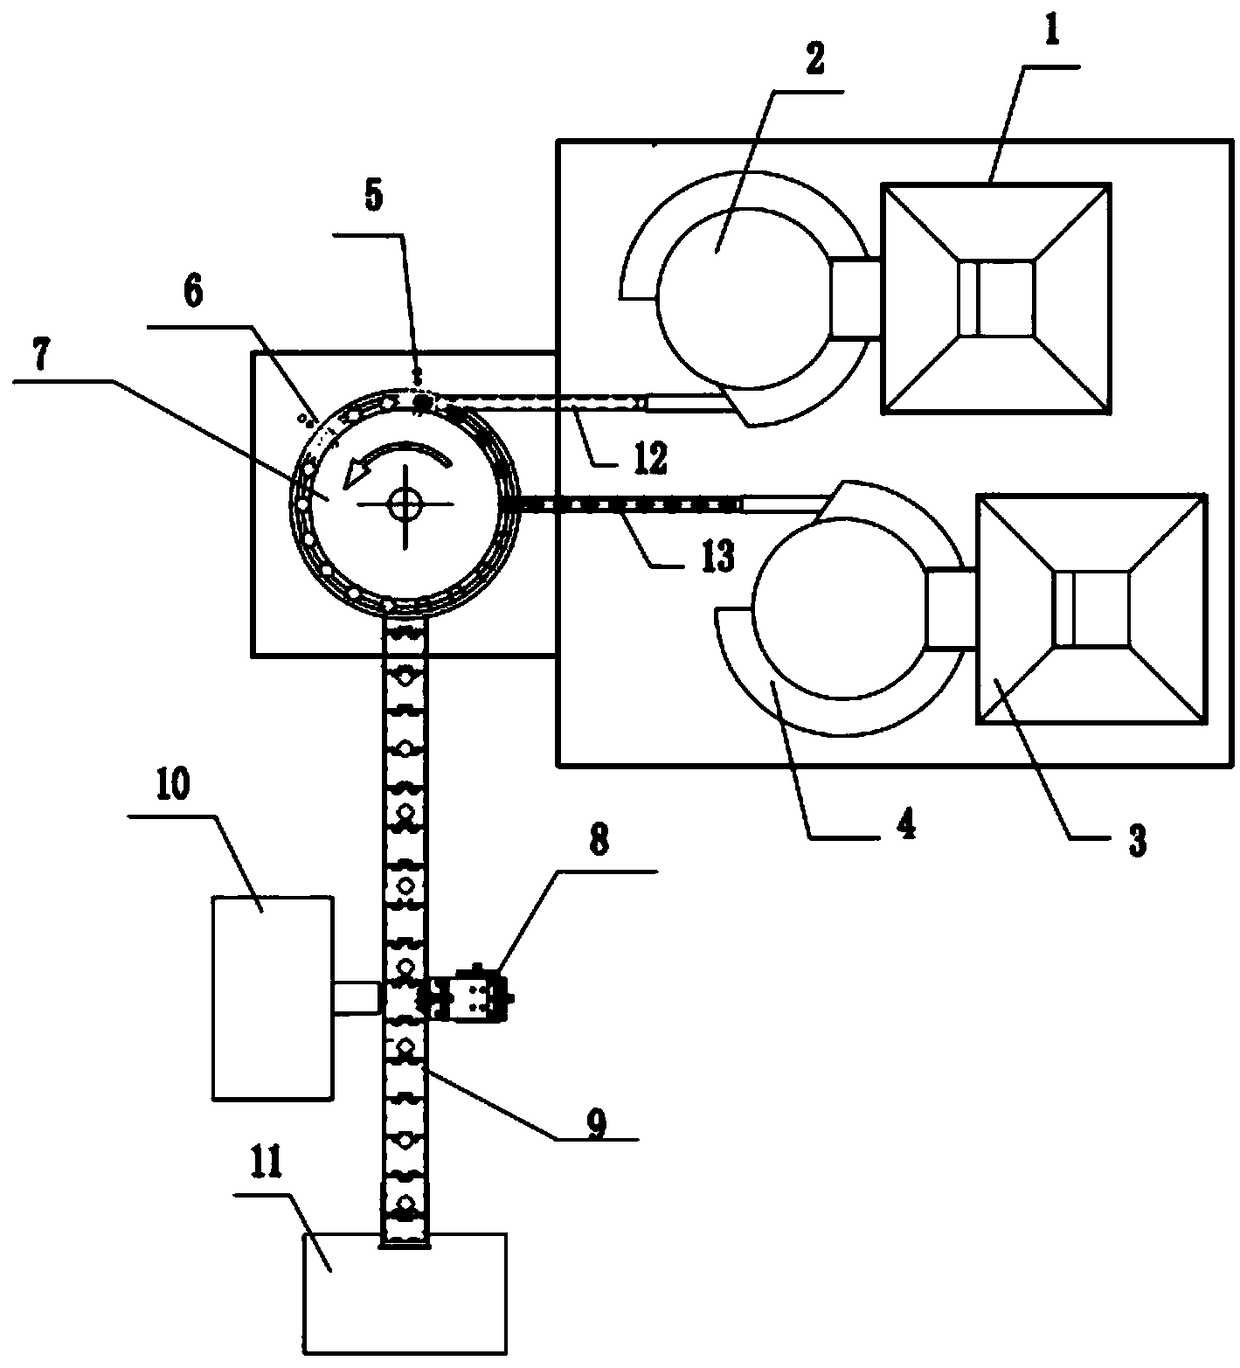 Device for automatically sleeving pipe fitting plug with sealing ring